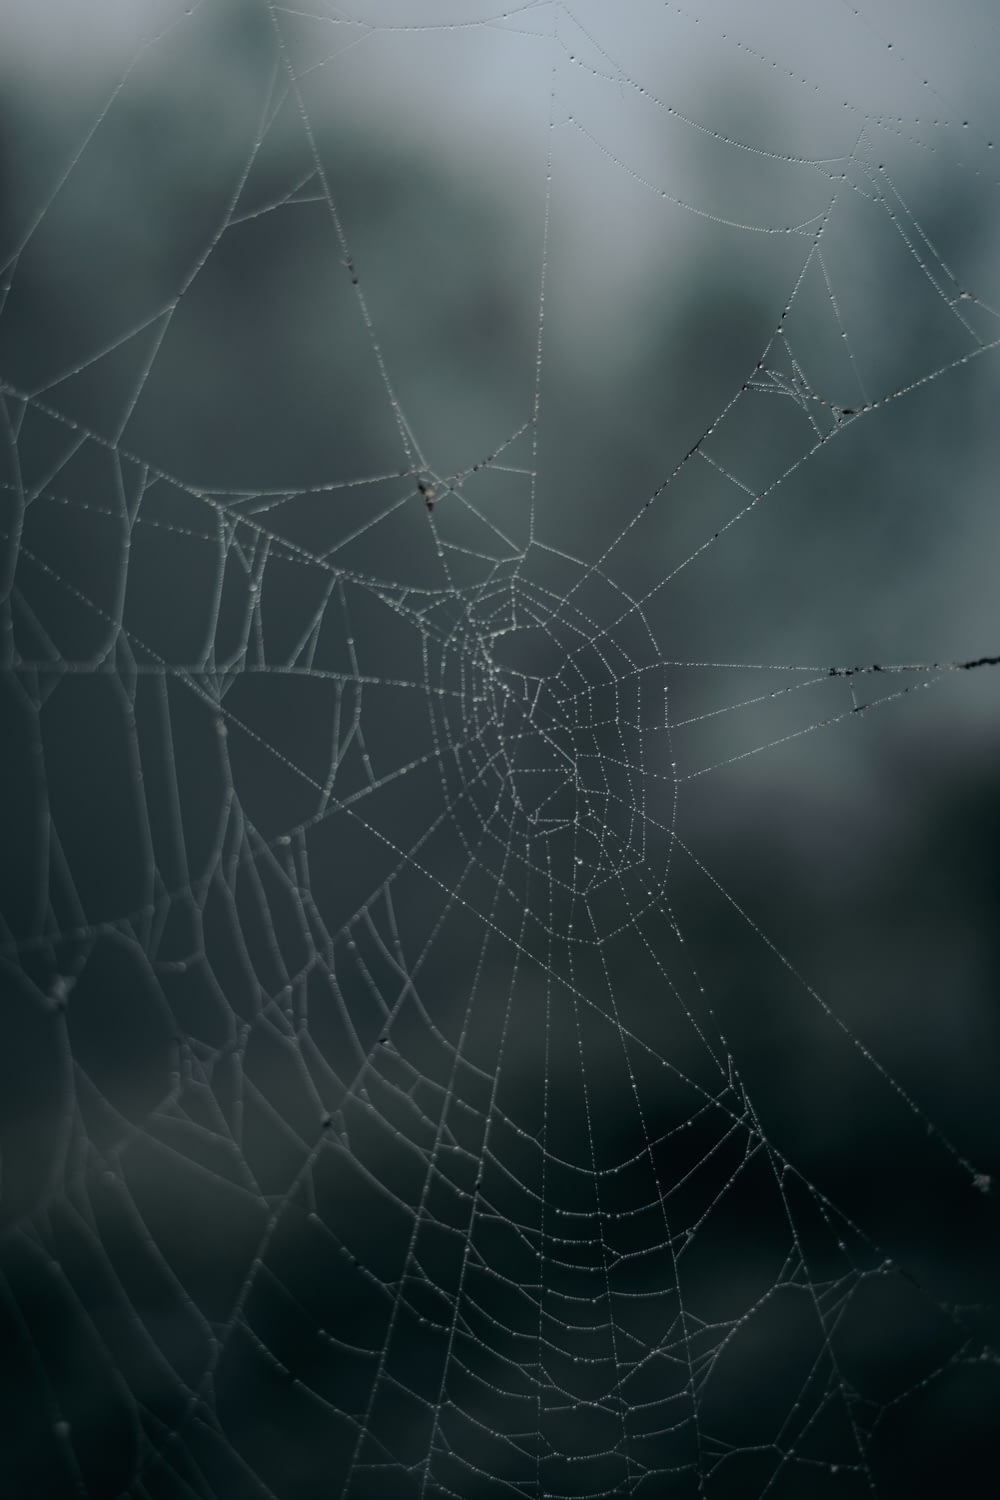 spider web in close up photography